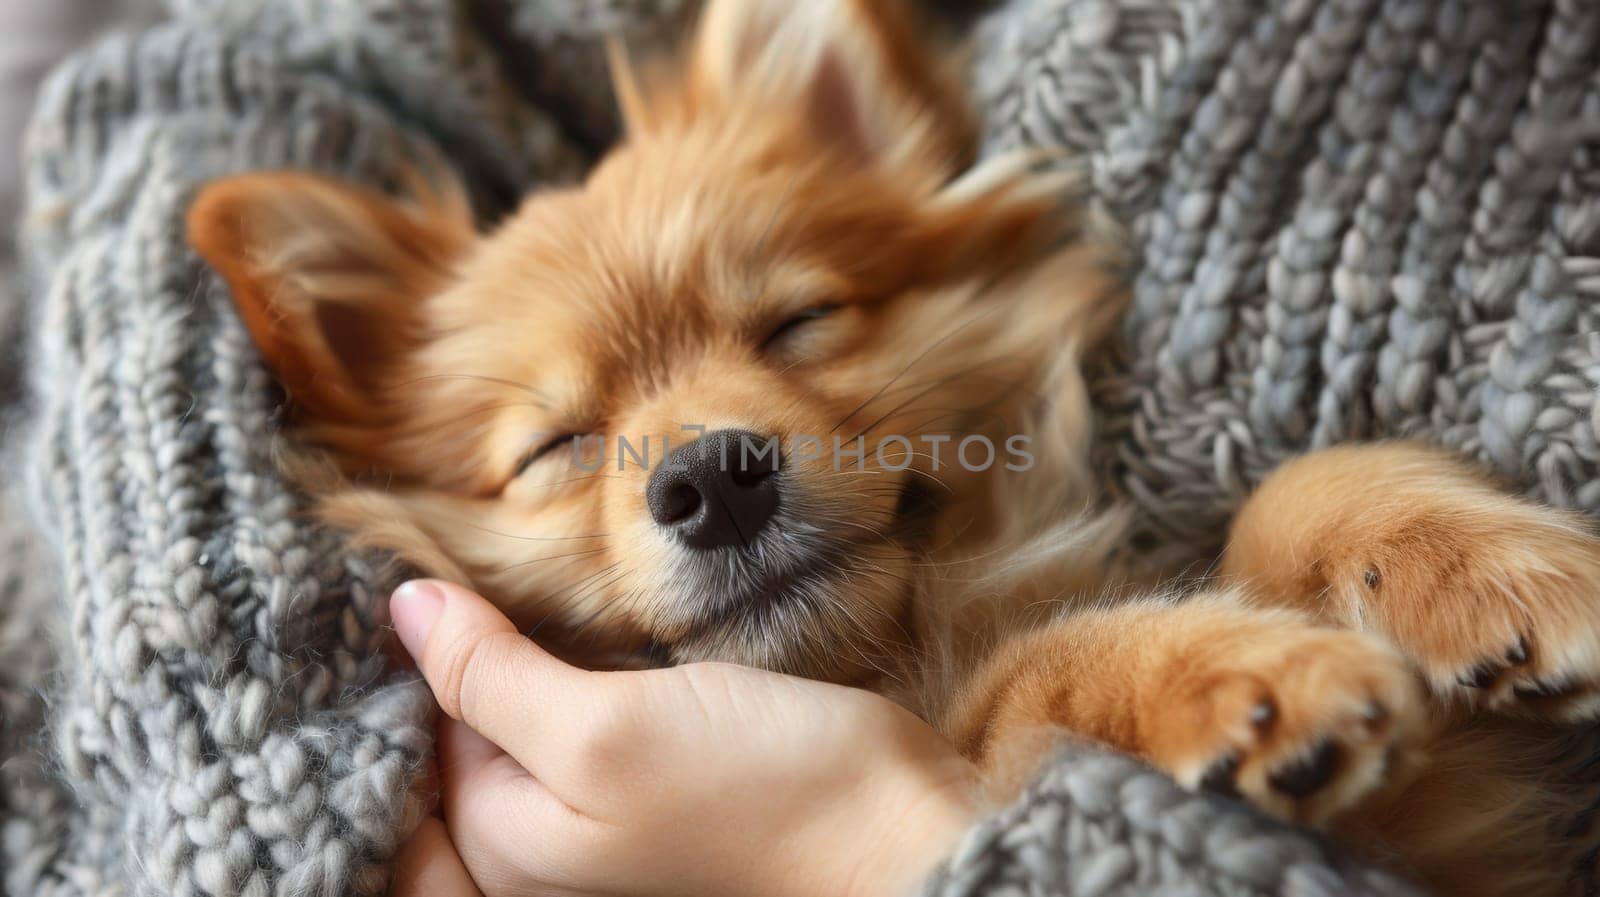 A small dog laying on a person's lap with its eyes closed, AI by starush